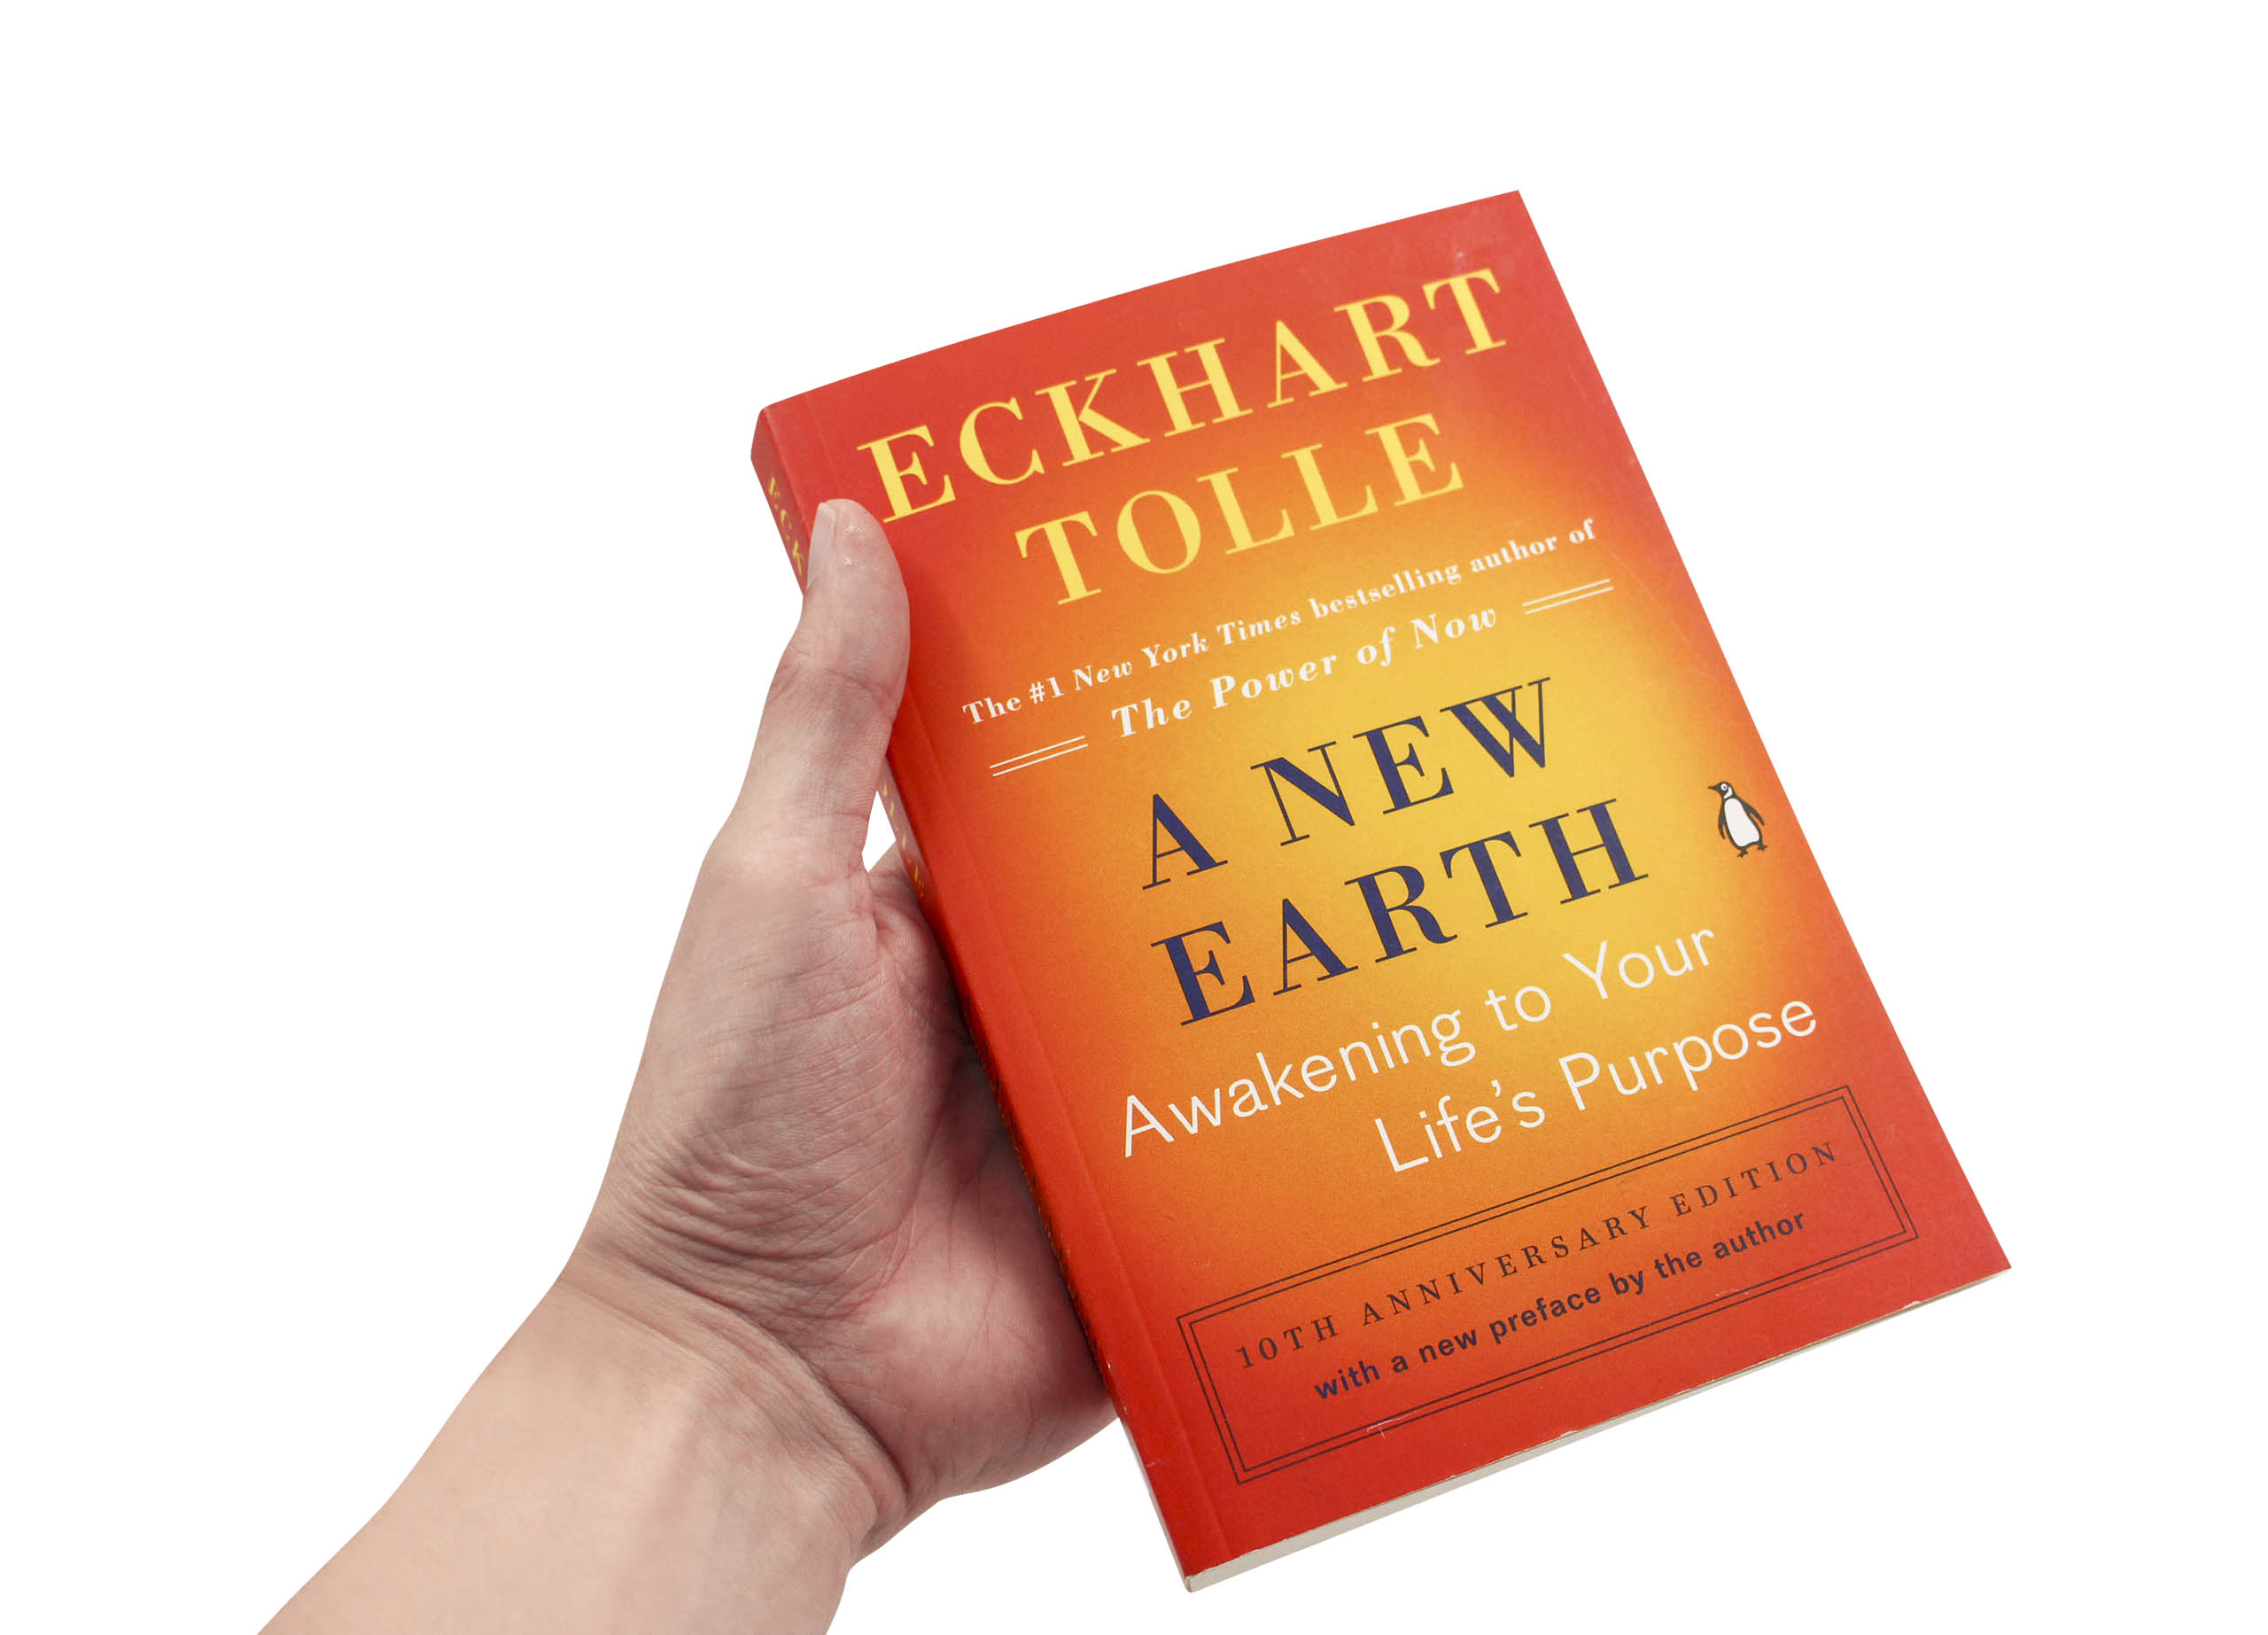 A New Earth by Eckhart Tolle - Crystal Dreams